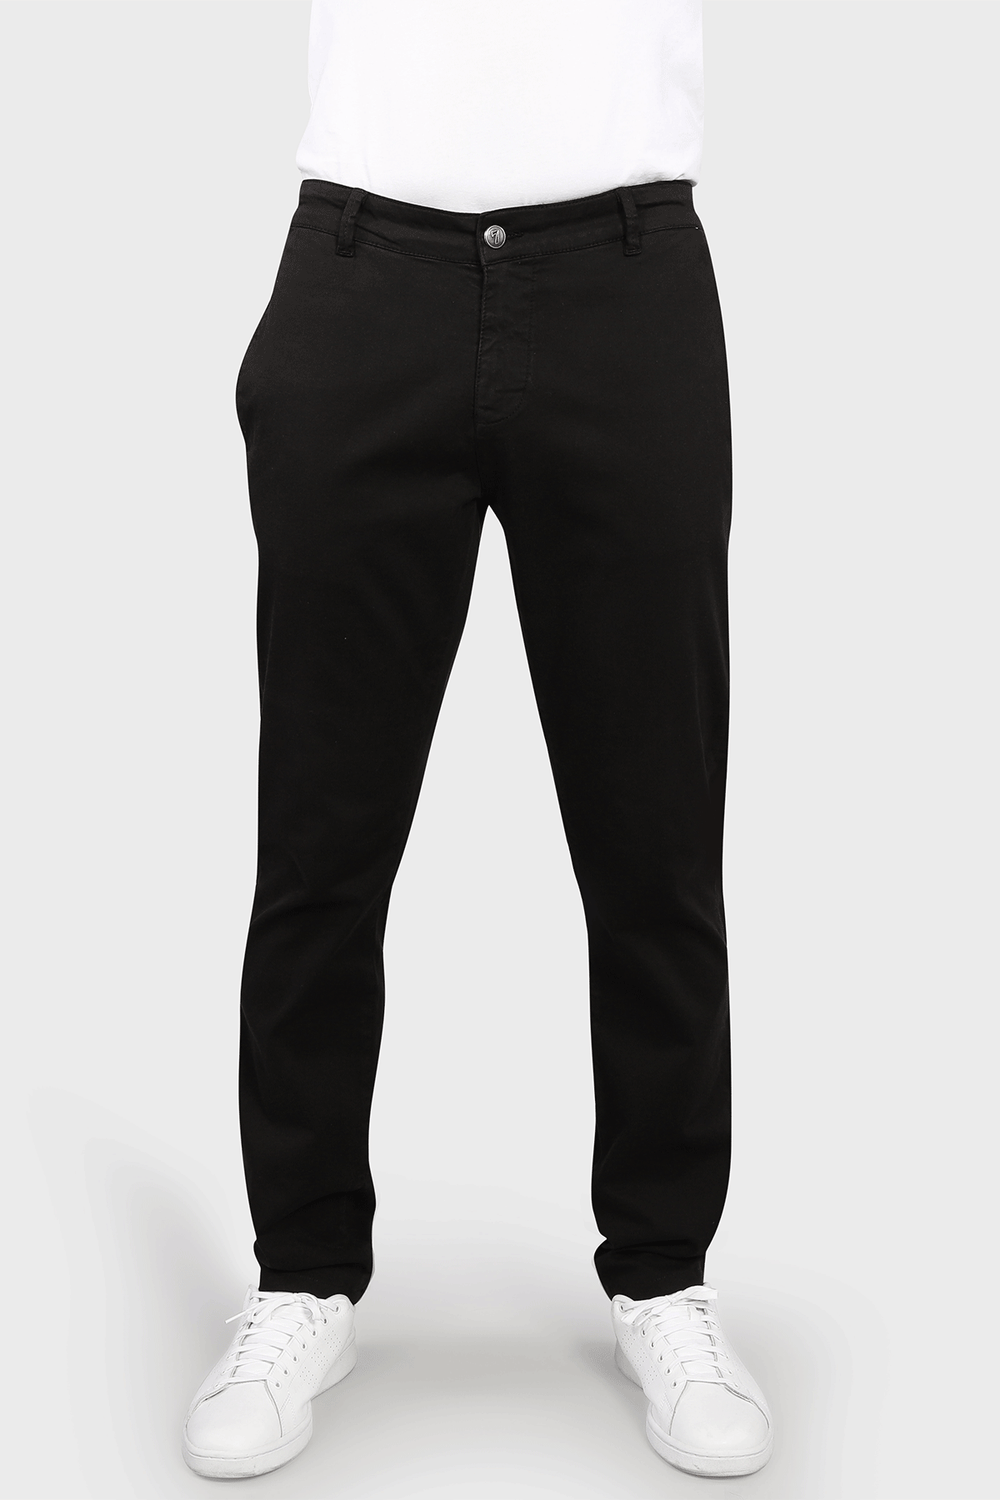 Flat Front Stretch Pants in Black - 7 Downie St.®